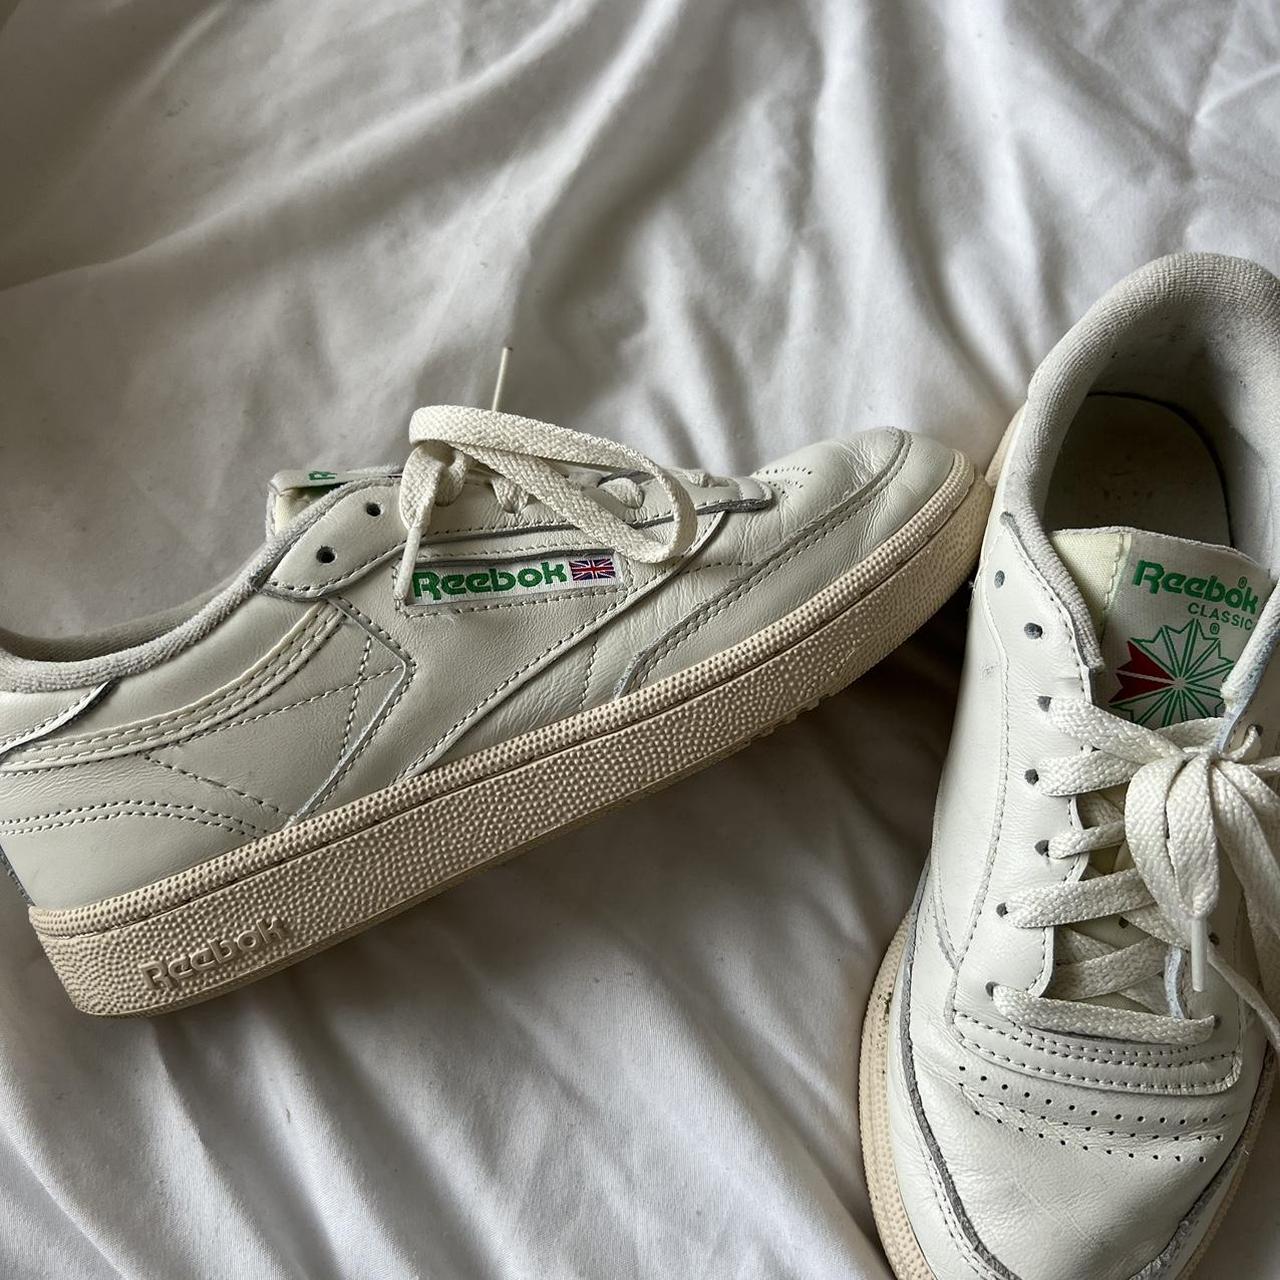 Reebok classic club C trainers in chalk with green... - Depop